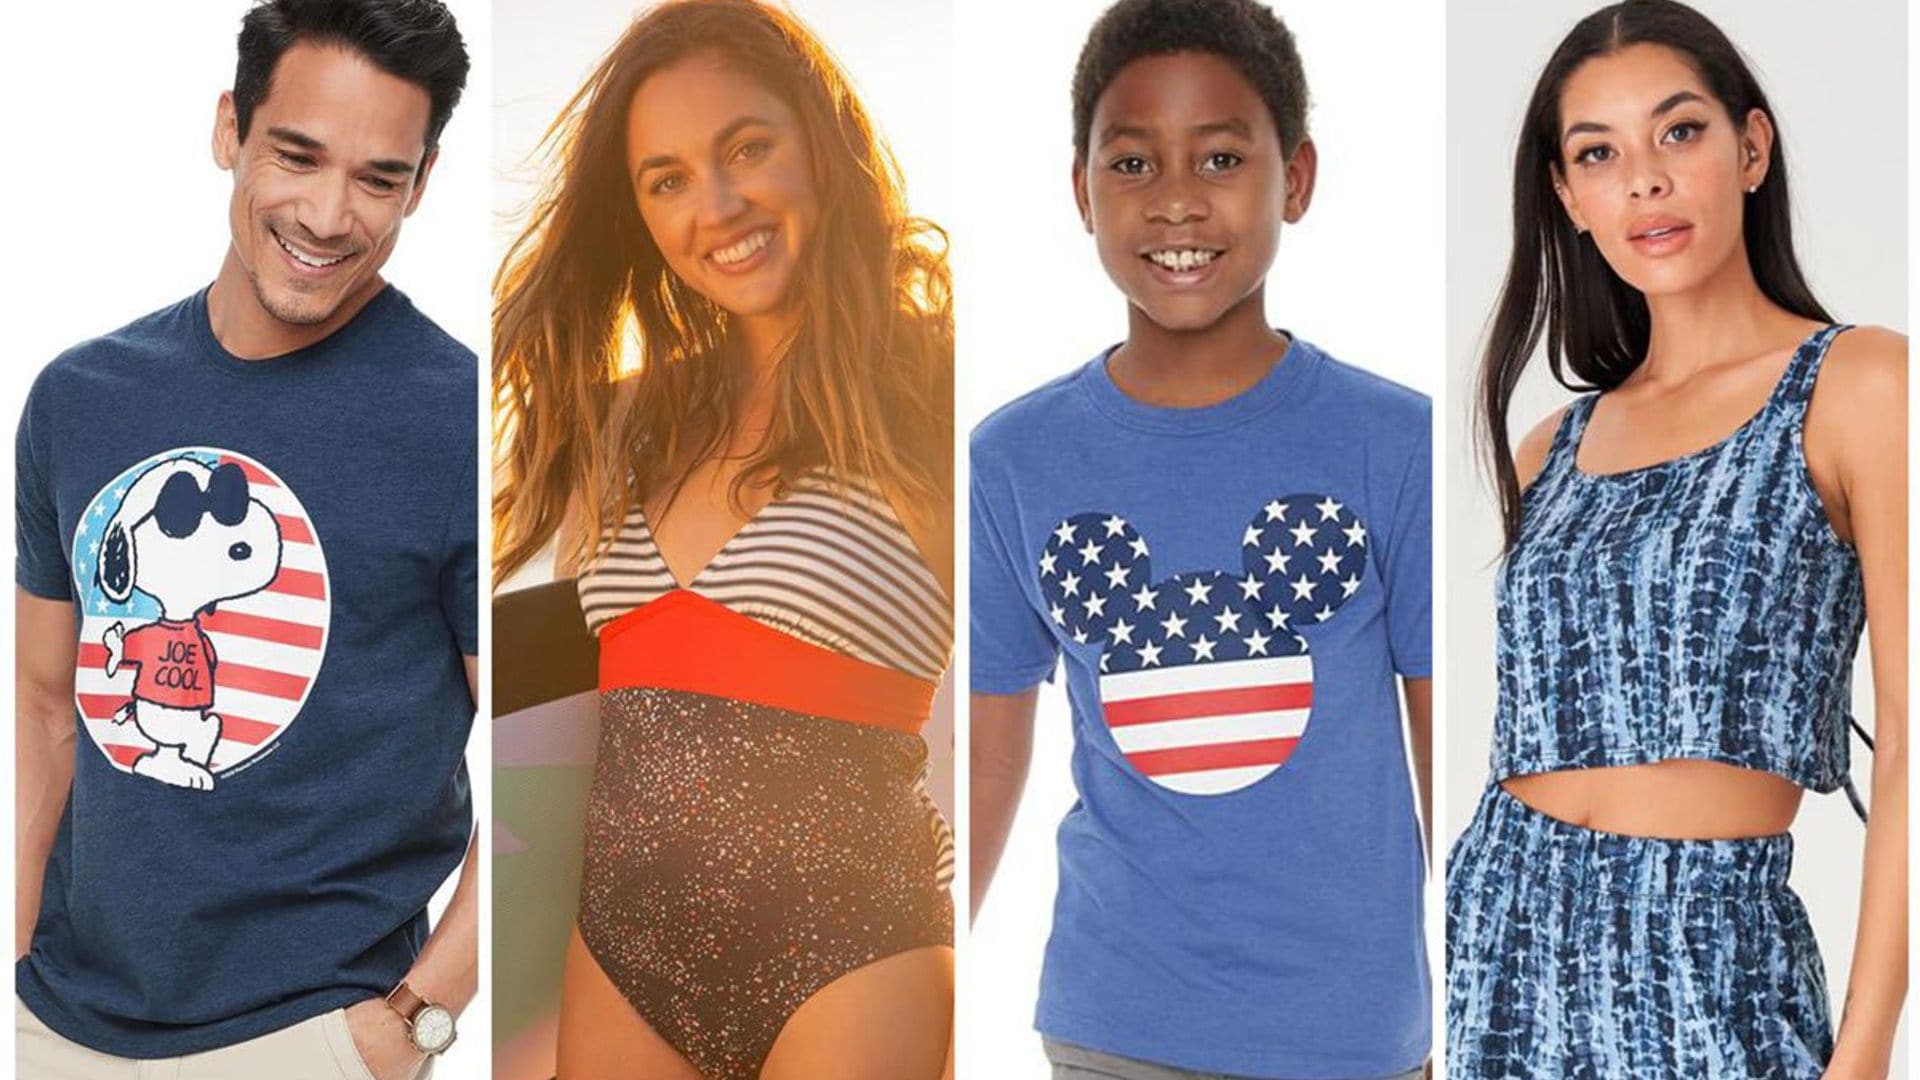 Red, White and Blue: 2021 looks you might want to rock this 4th of July with the whole family